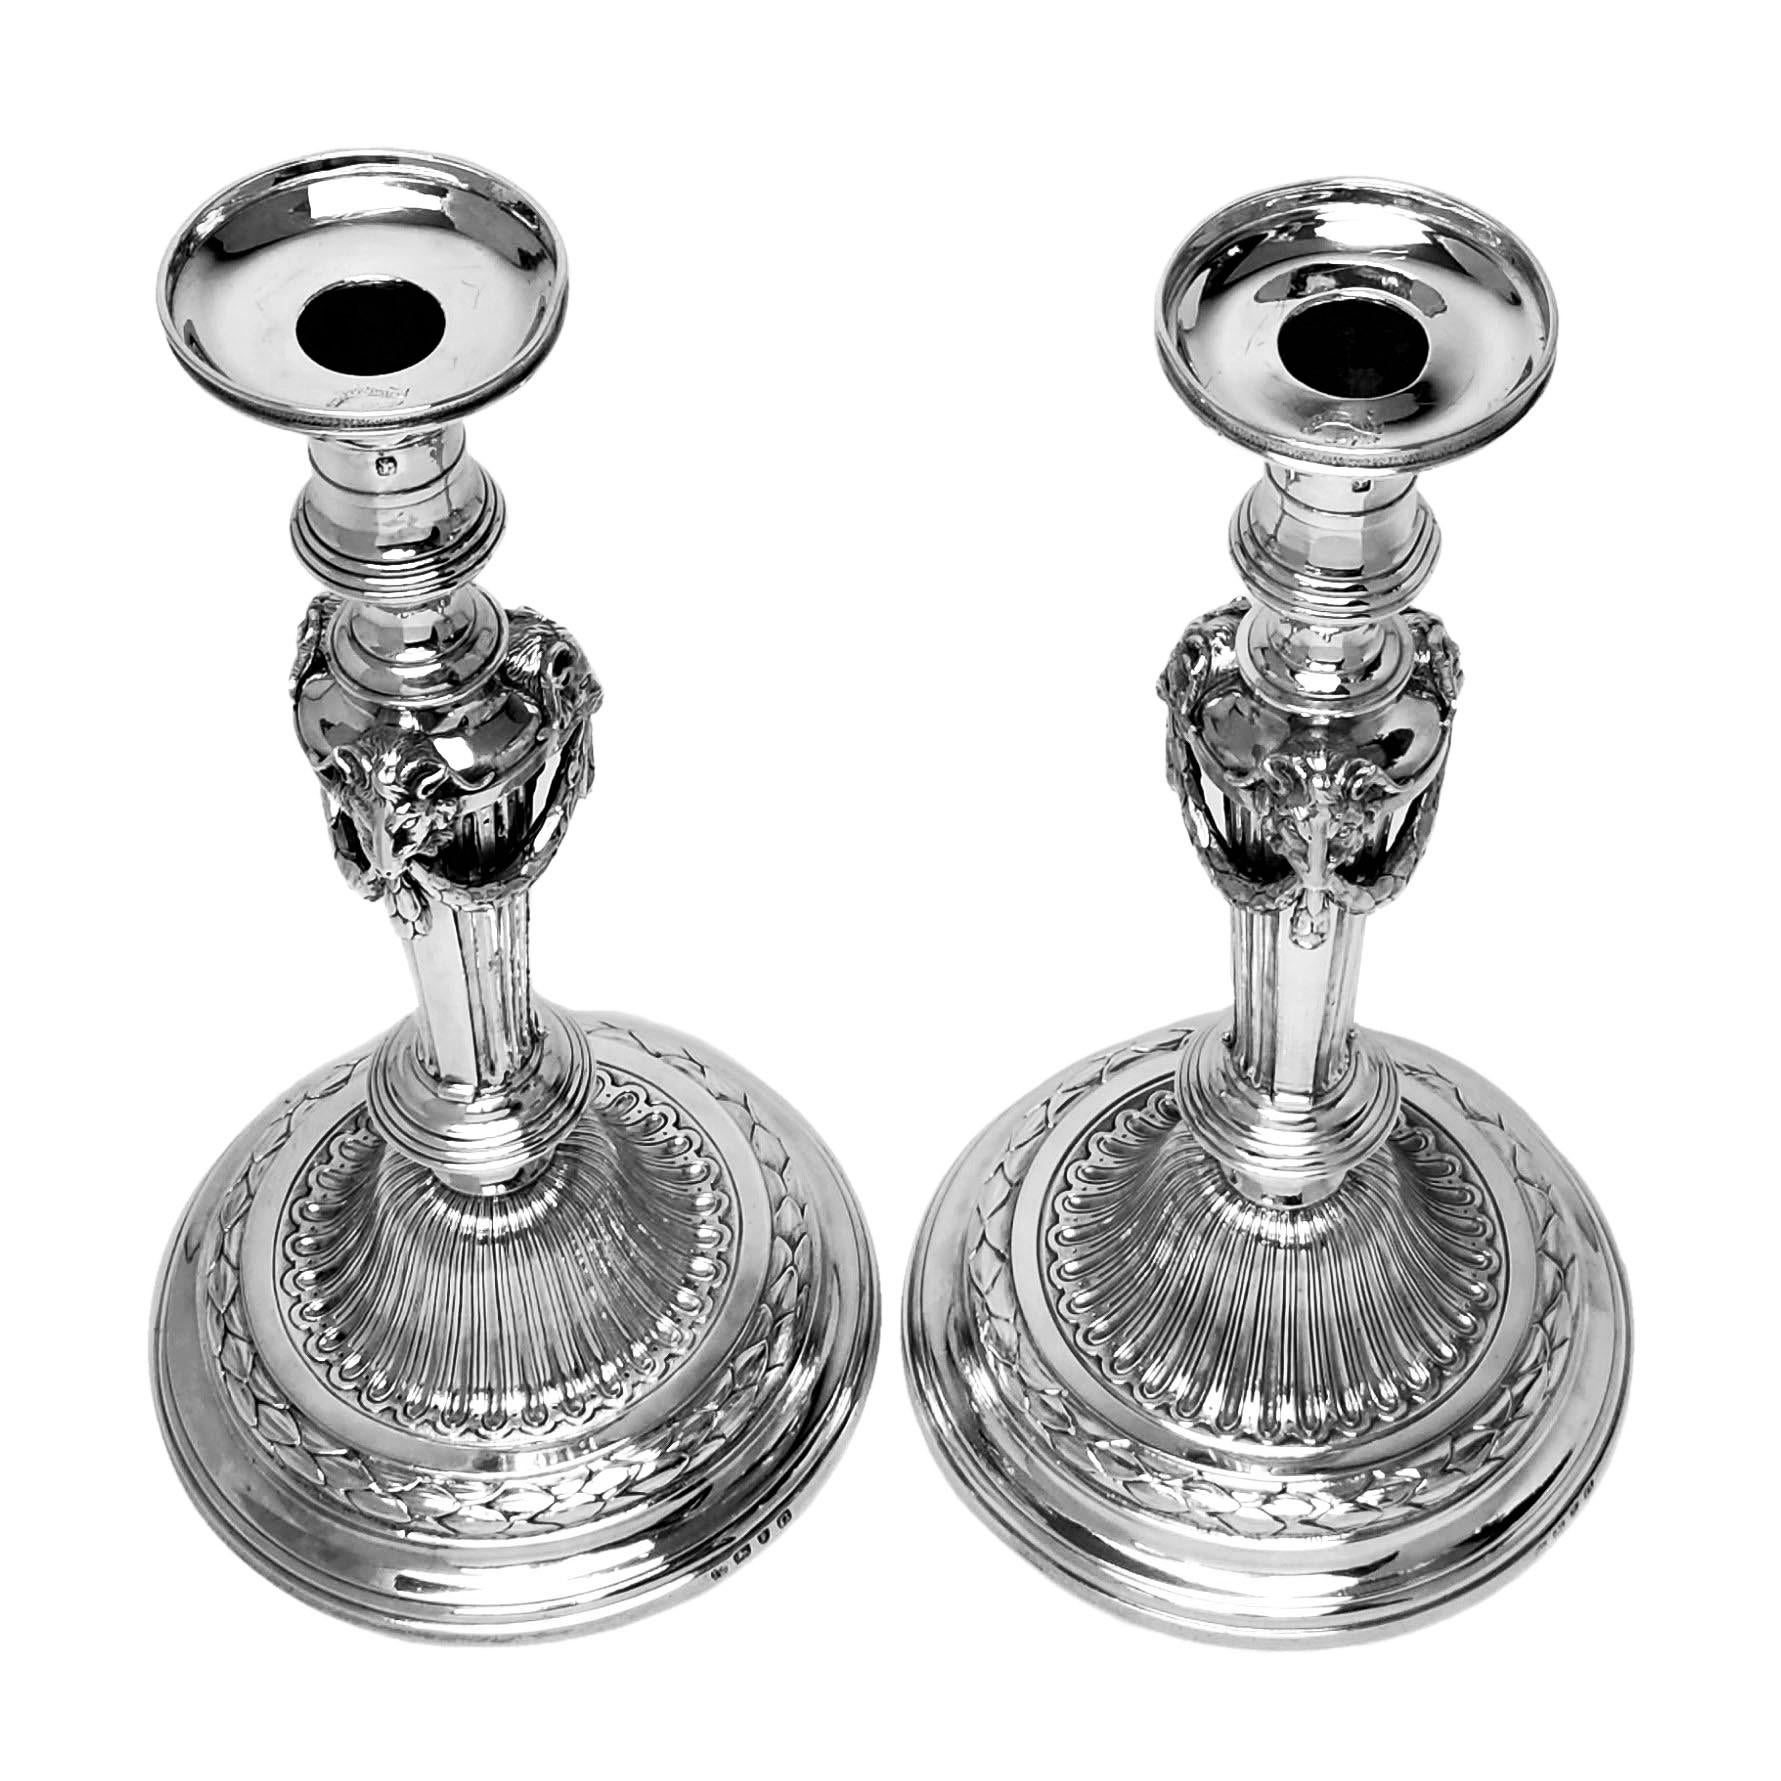 English Pair Antique Georgian Sterling Silver Candelabra Candlesticks 1768 / 78 For Sale